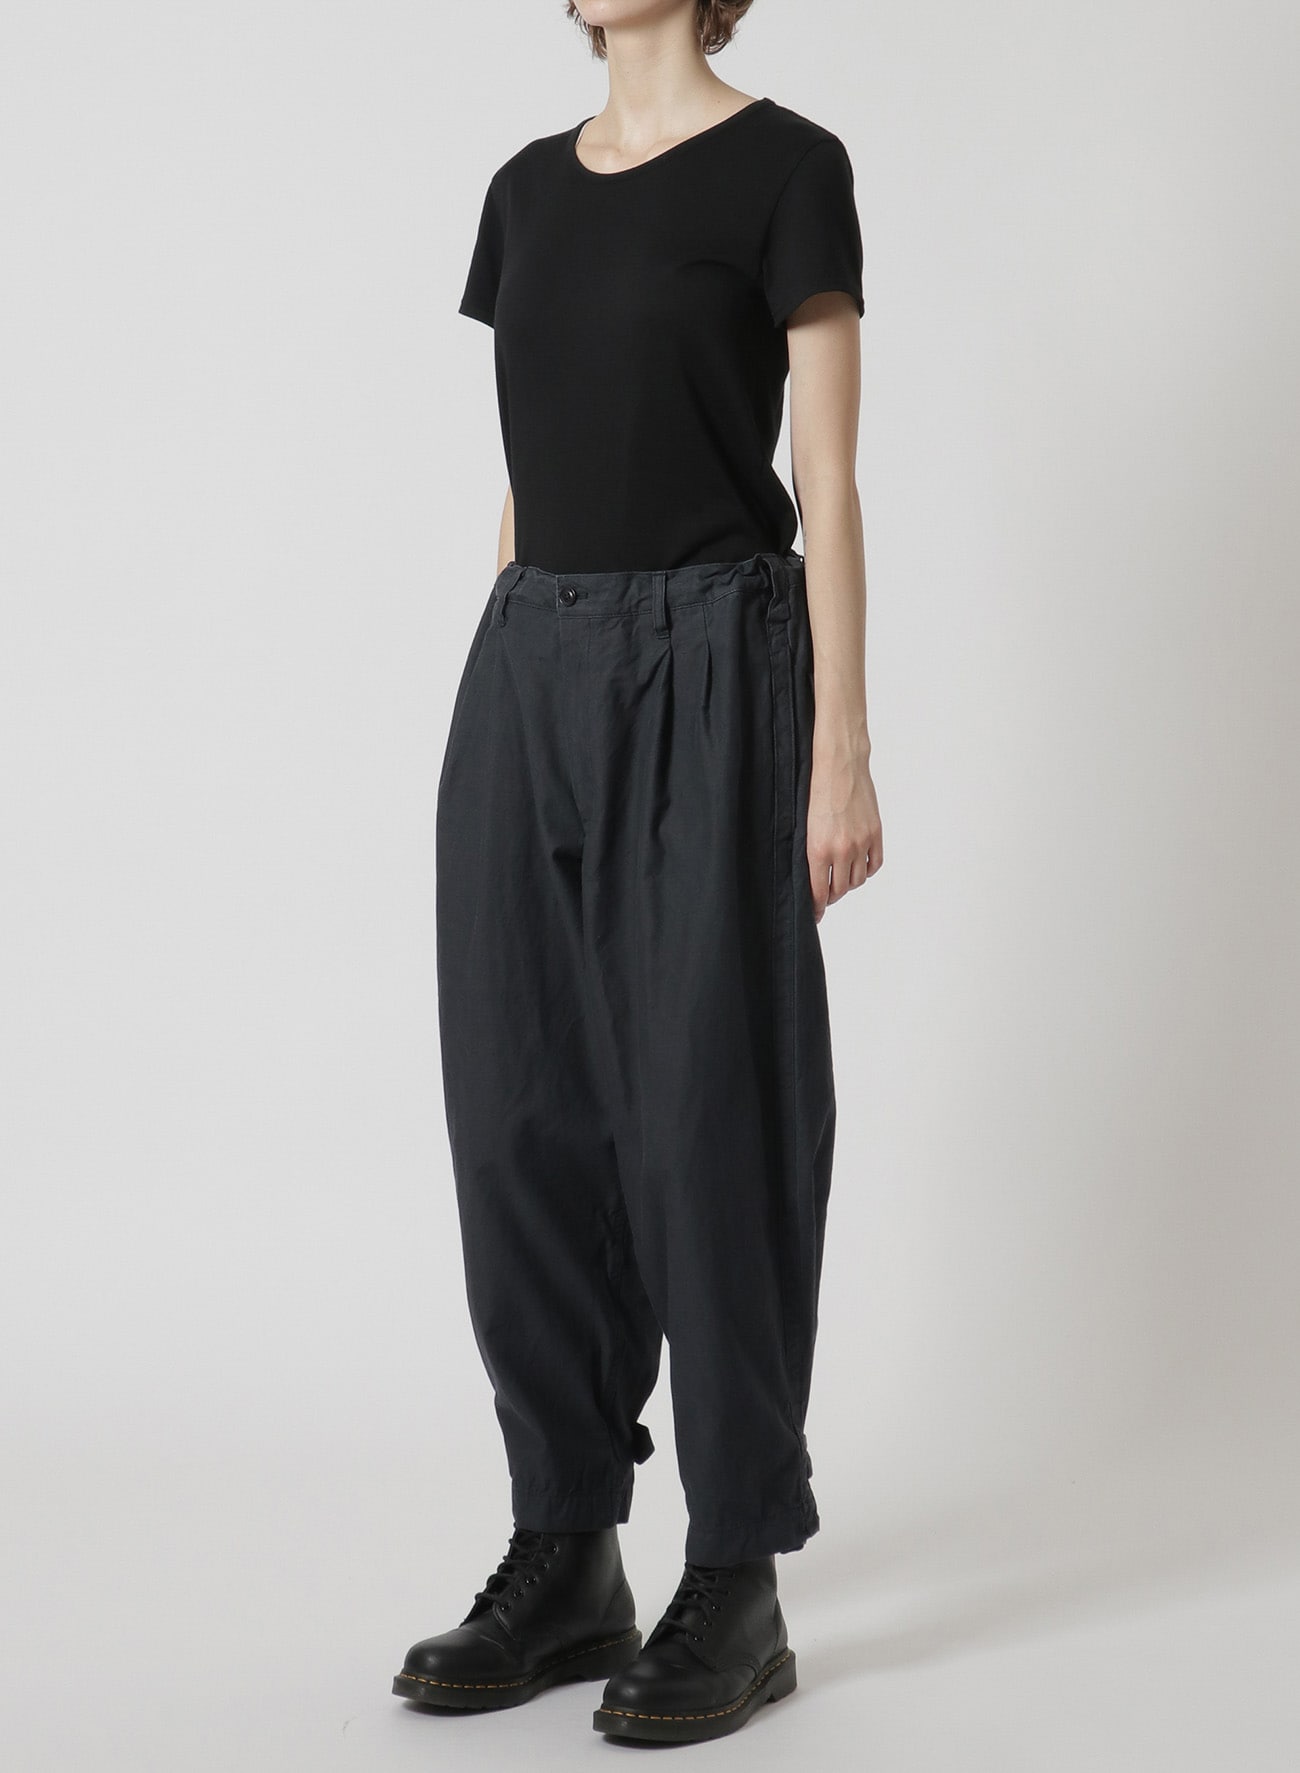 Y's-Black Name]BACKSIDE SULFURIZATION SATIN 2 TUCK PANTS WITH